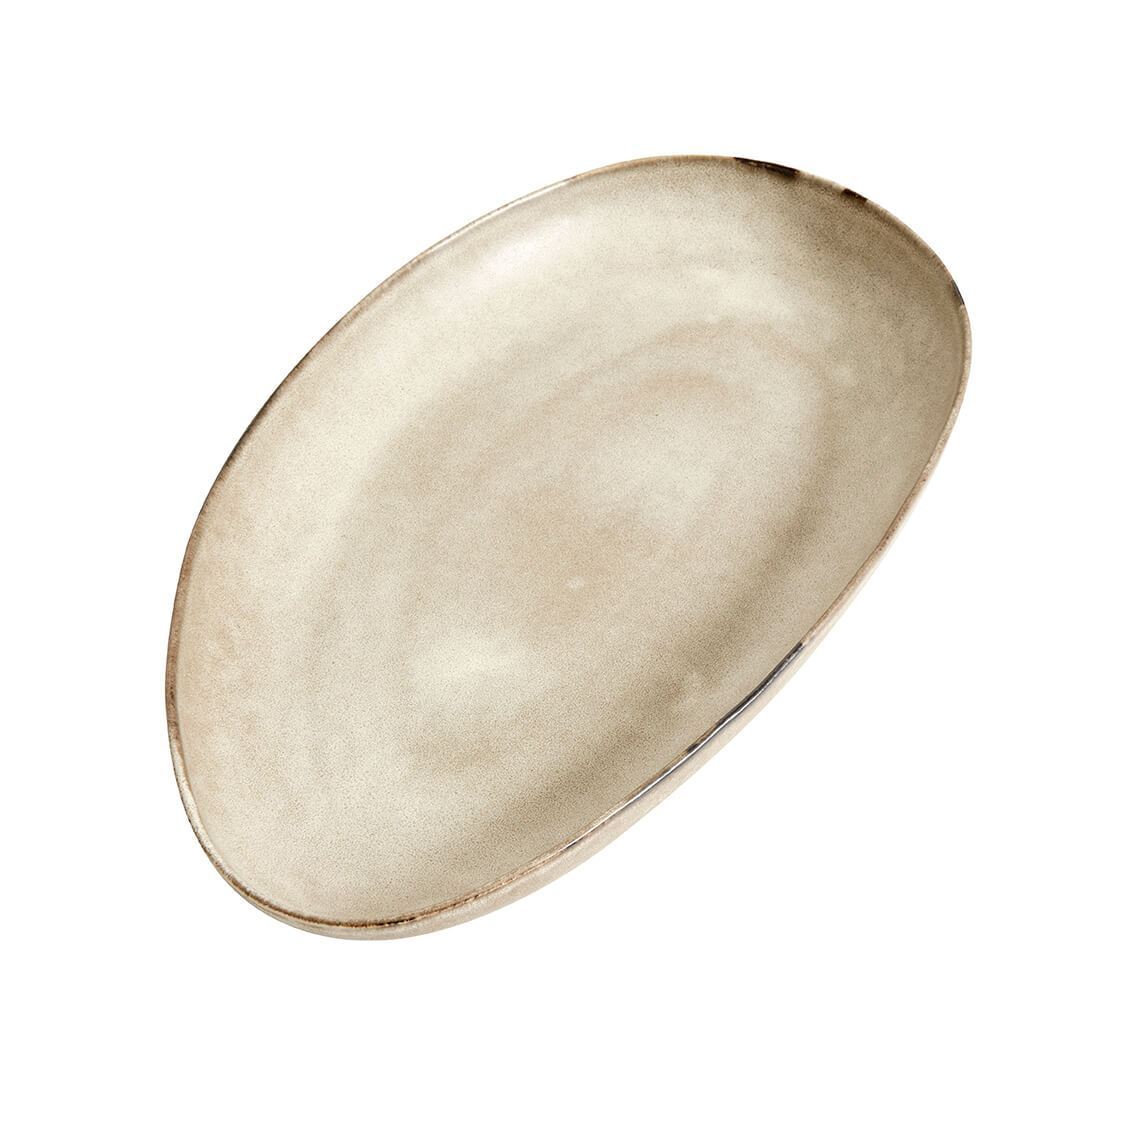 Mame Mame Serving Plate Oster Oyster, 43cm